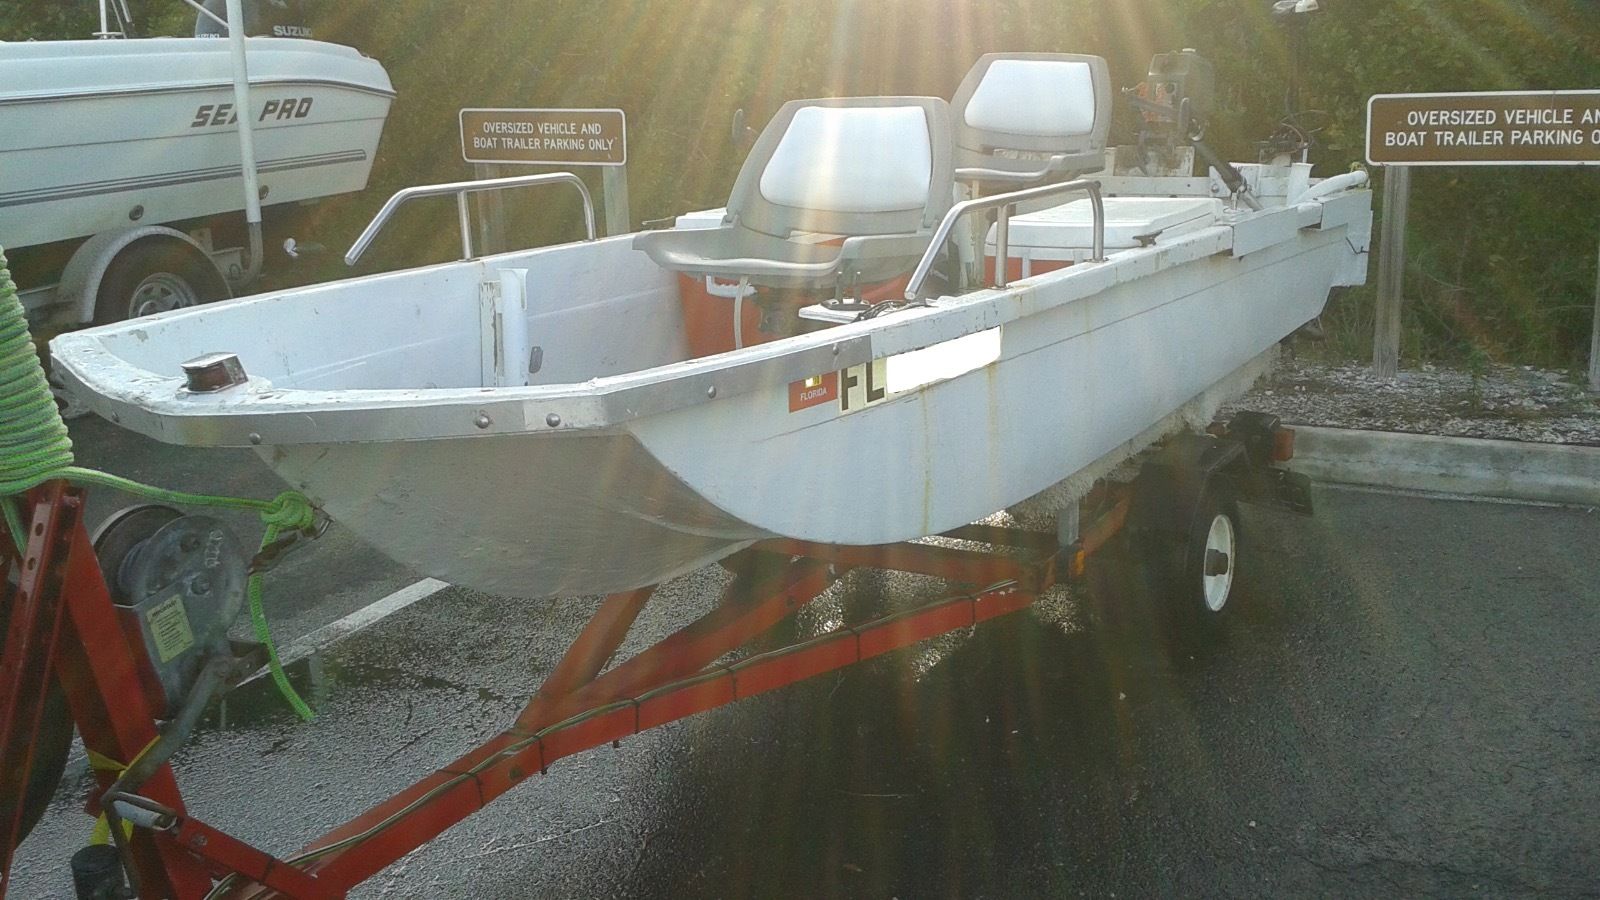 Homemade Fishing Boat 2013 for sale for $700 - Boats-from ...